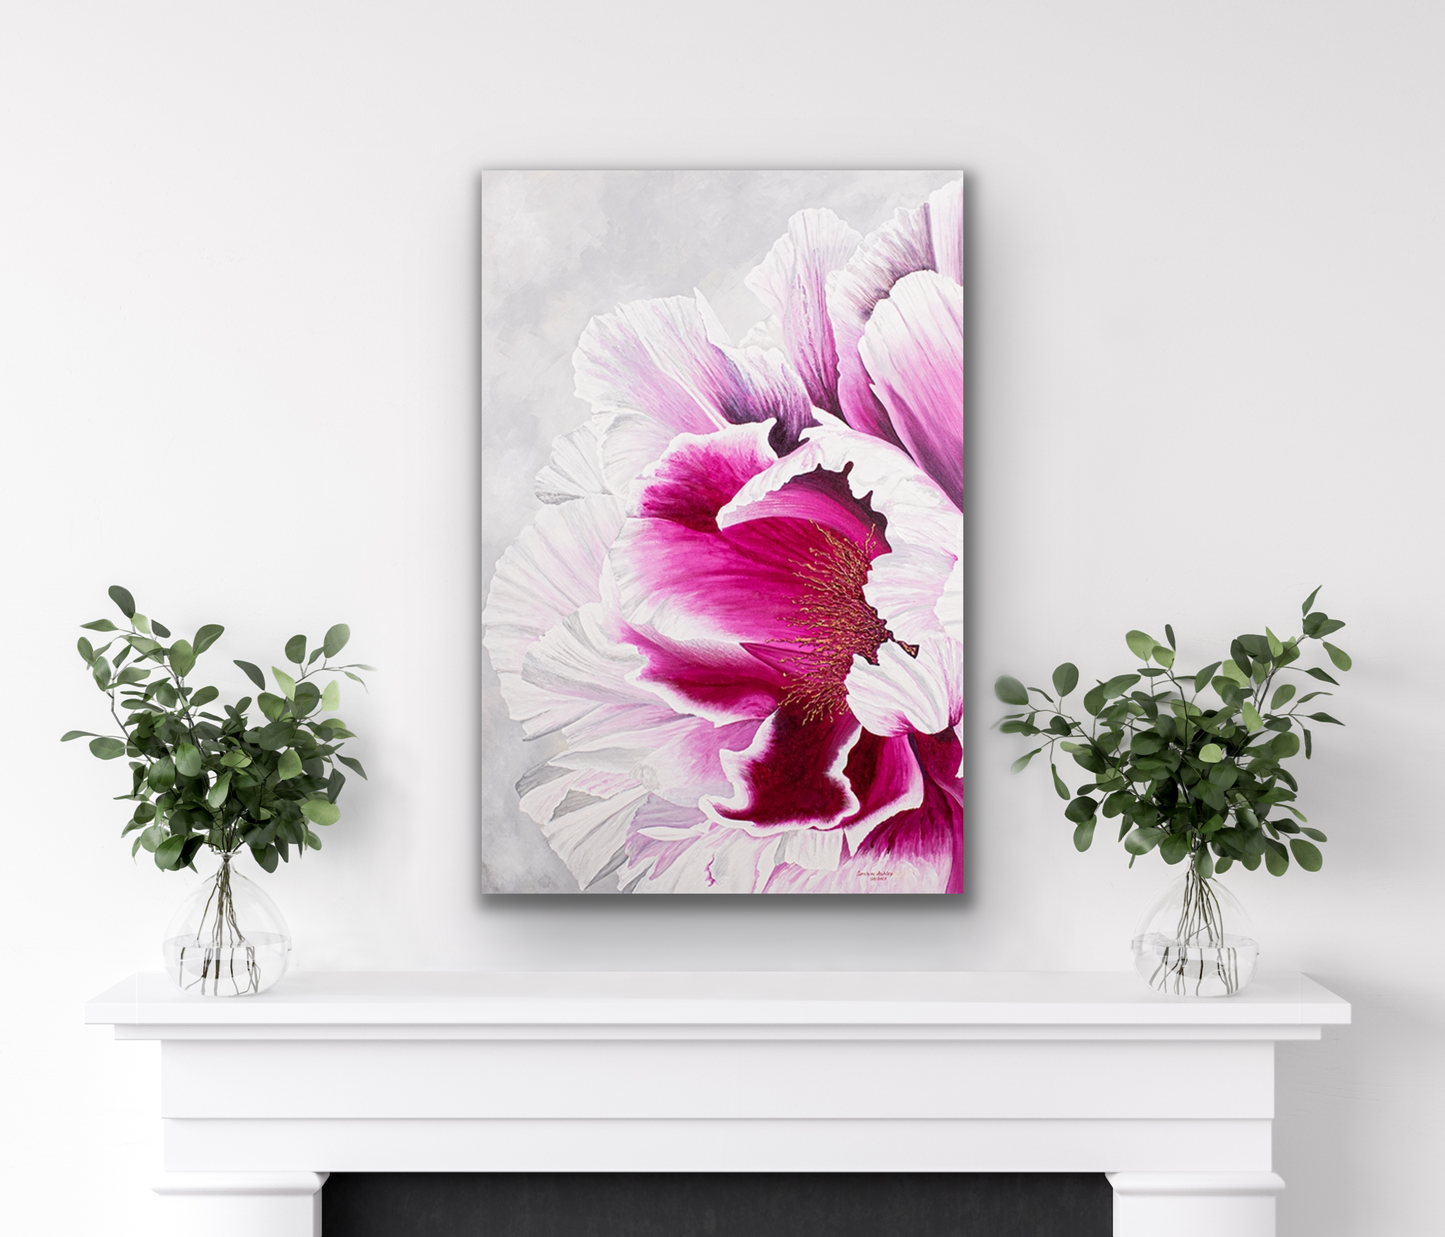 "Tranquility" art work comes in five different canvas print sizes to fit your wall perfectly.